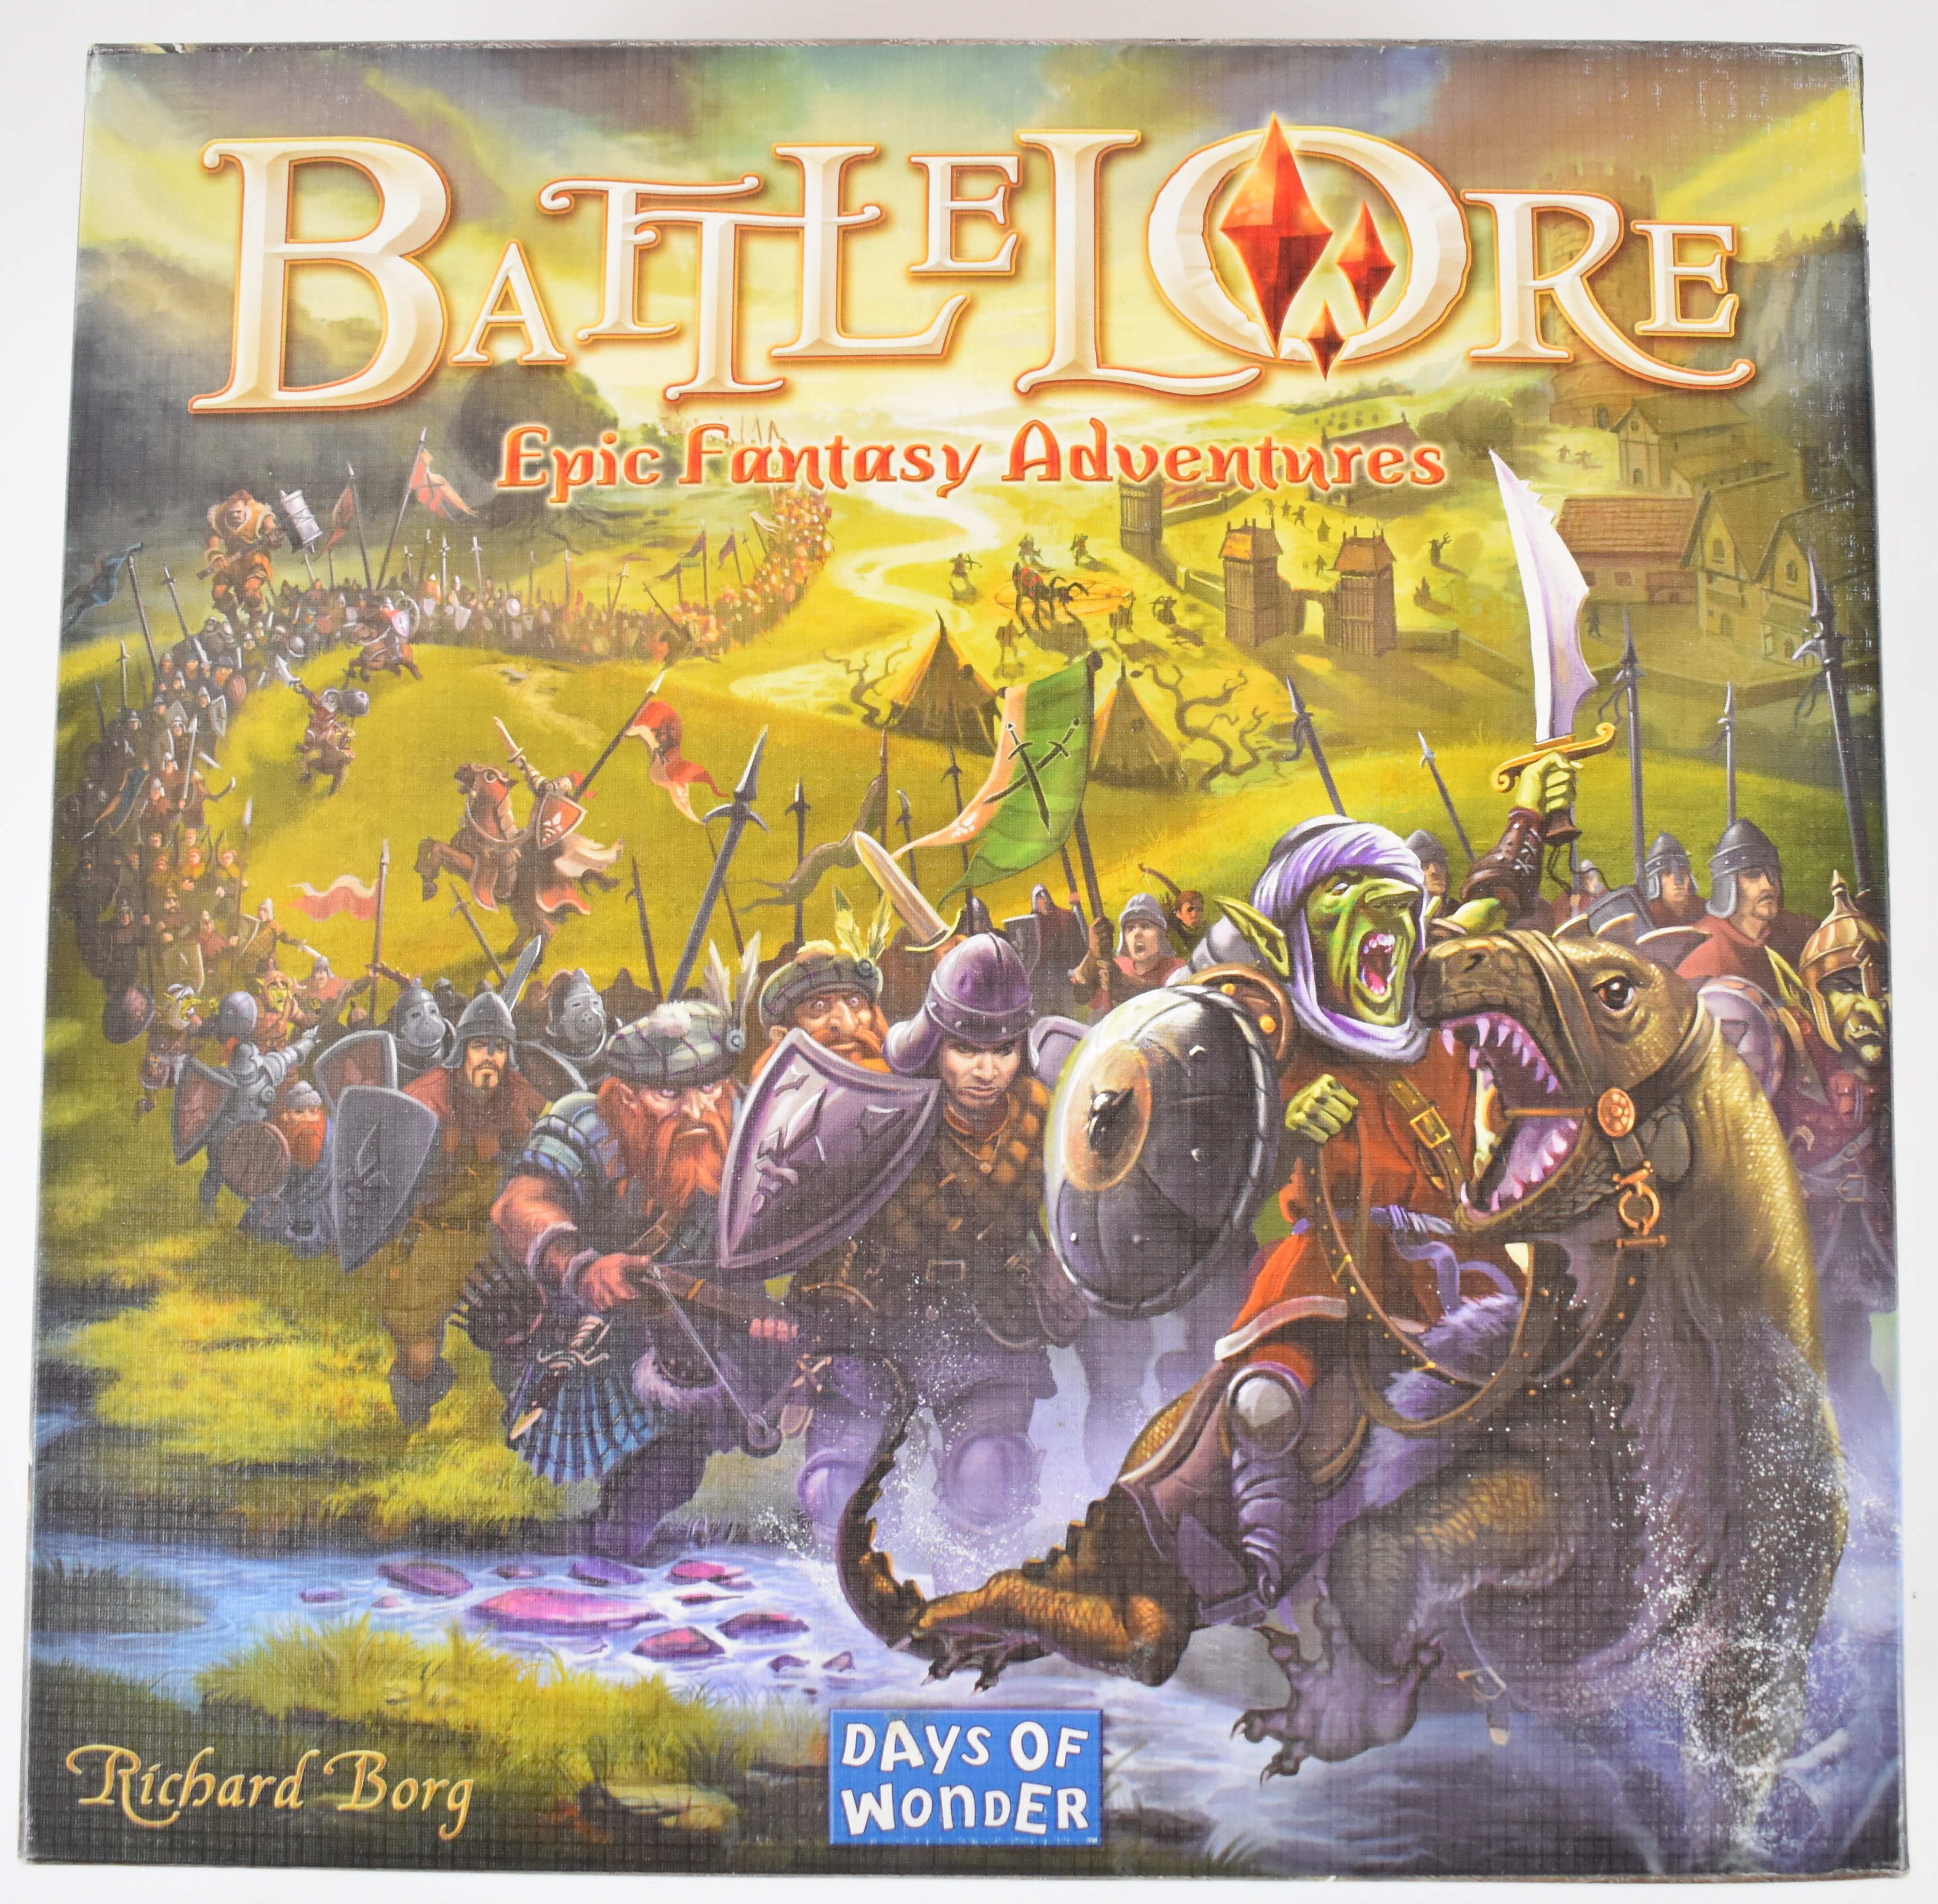 Seven fantasy themed board games comprising Dungeon & Dragons, Stonehenge, Beowulf, Battle Lore, - Image 8 of 8